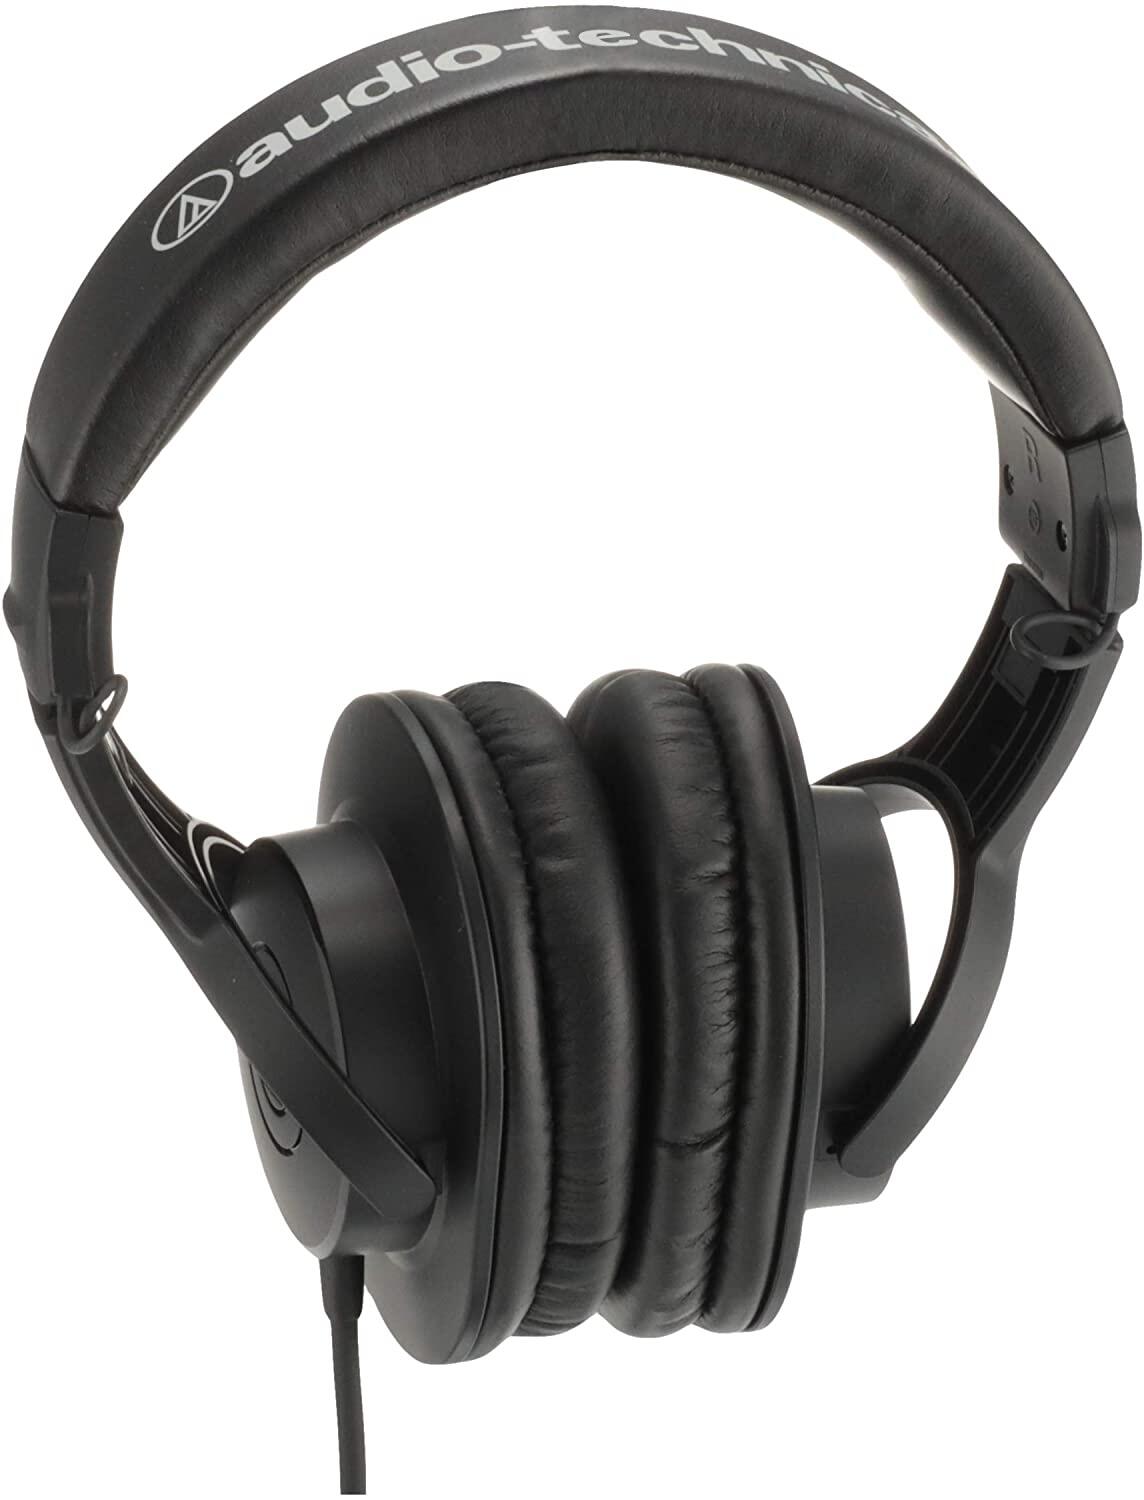 Audio-Technica ATH-M20X Professional Monitor Headphones / Wired Headphones For Audio Mixing